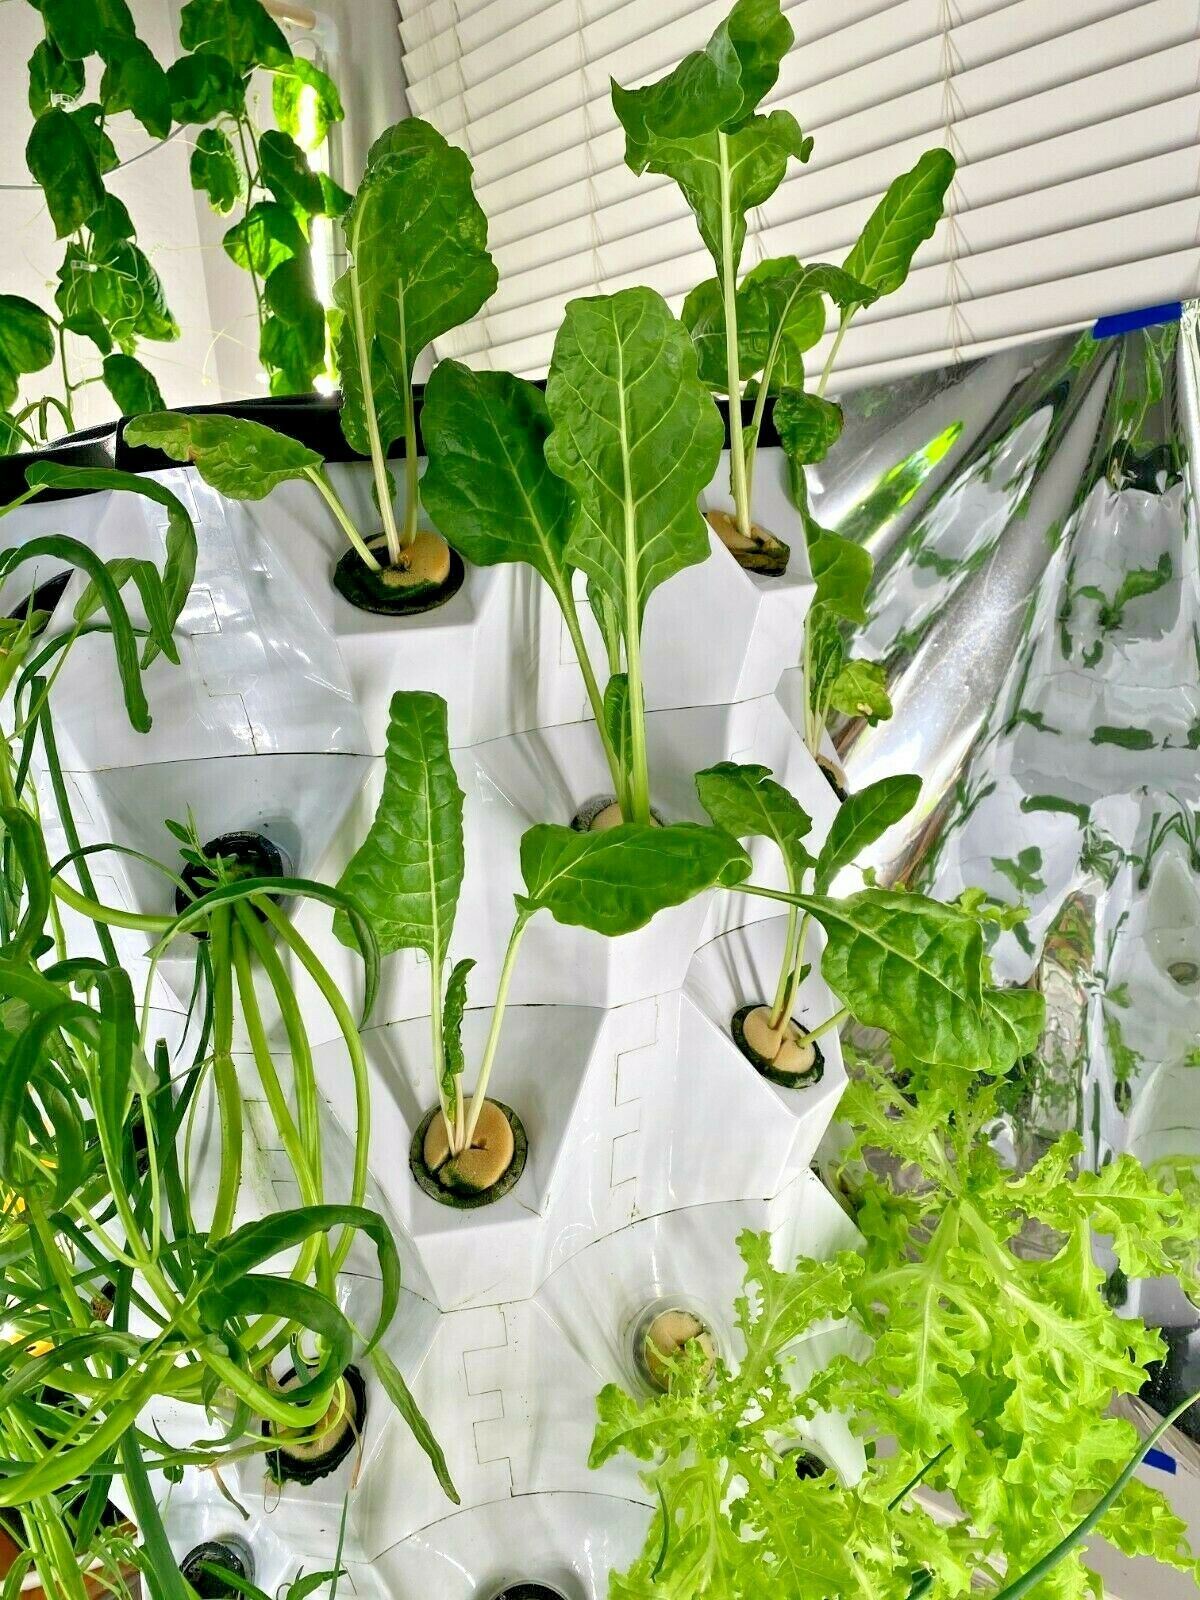 10-Layer 80-Plant Vertical Hydroponic Growing System with Aeroponics Equipment for Pineapple Tower Garden